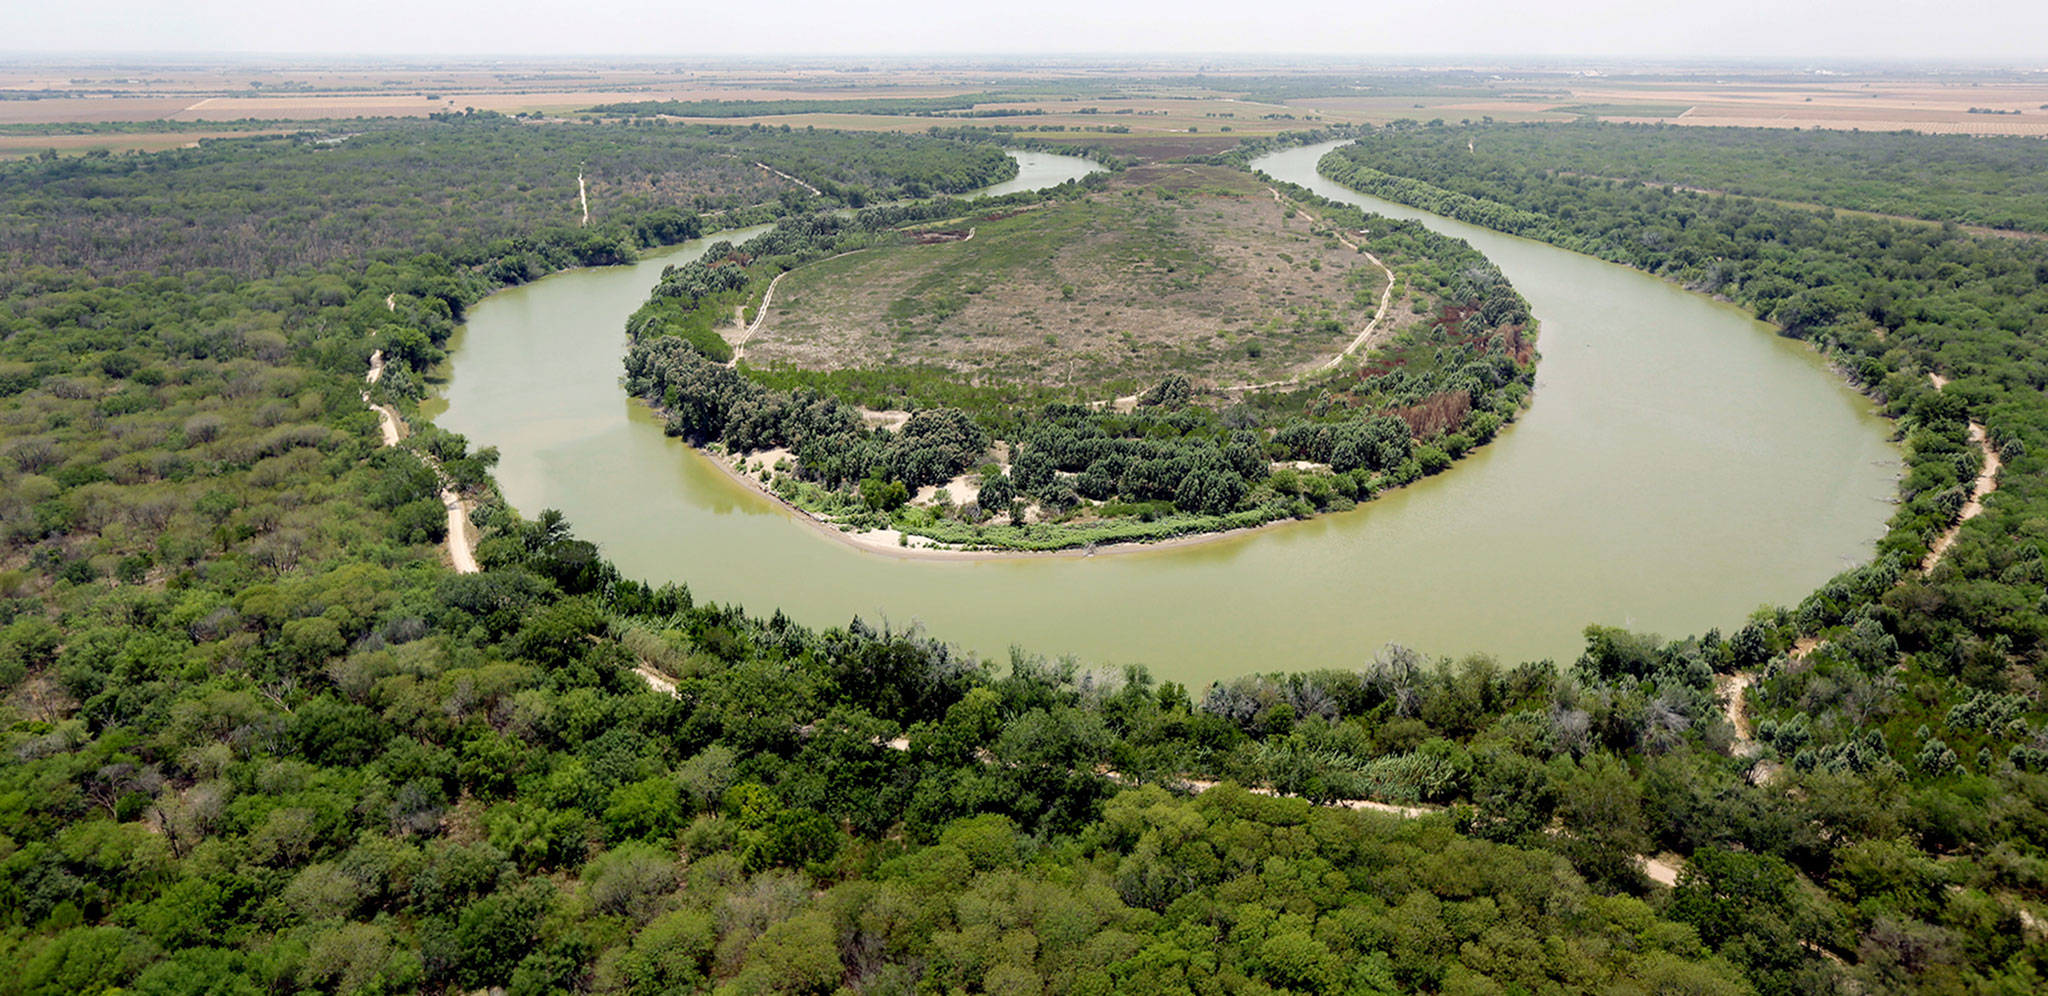 A bend in the Rio Grand in Mission, Texas. (AP Photo/Eric Gay, Pool, File)